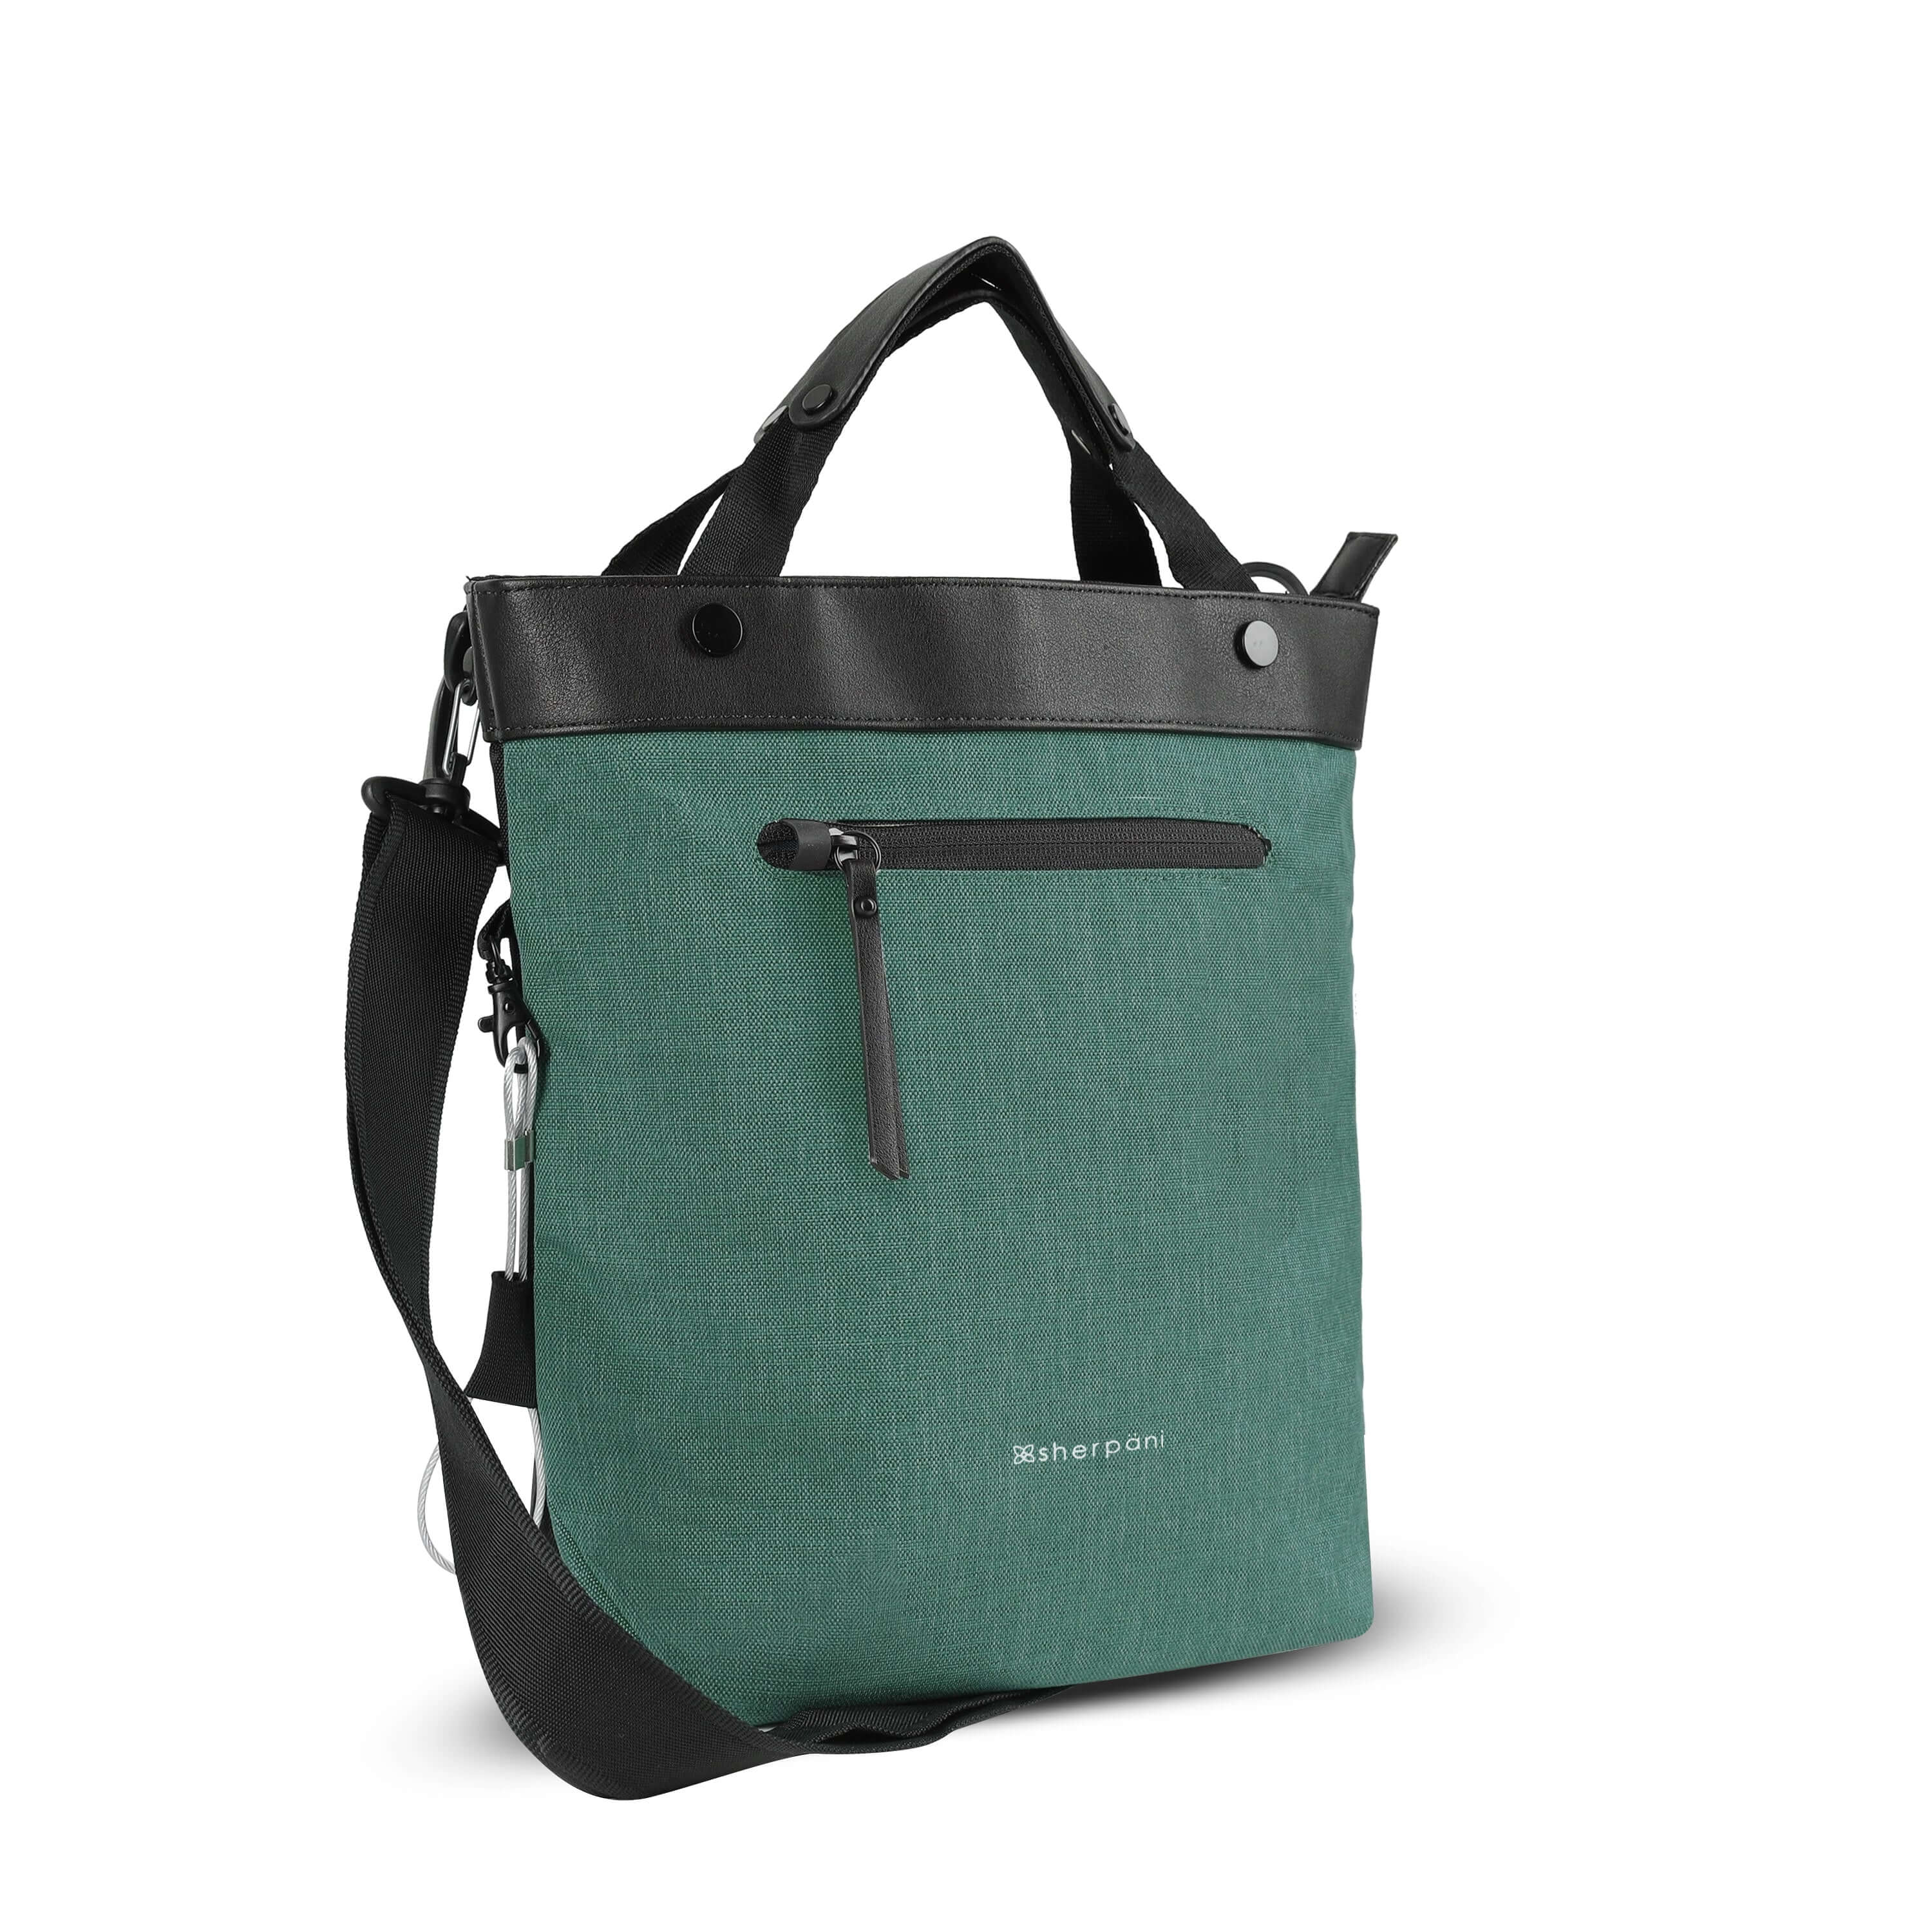 Women's Travel Tote Bags - Anti-Theft Utility Bags